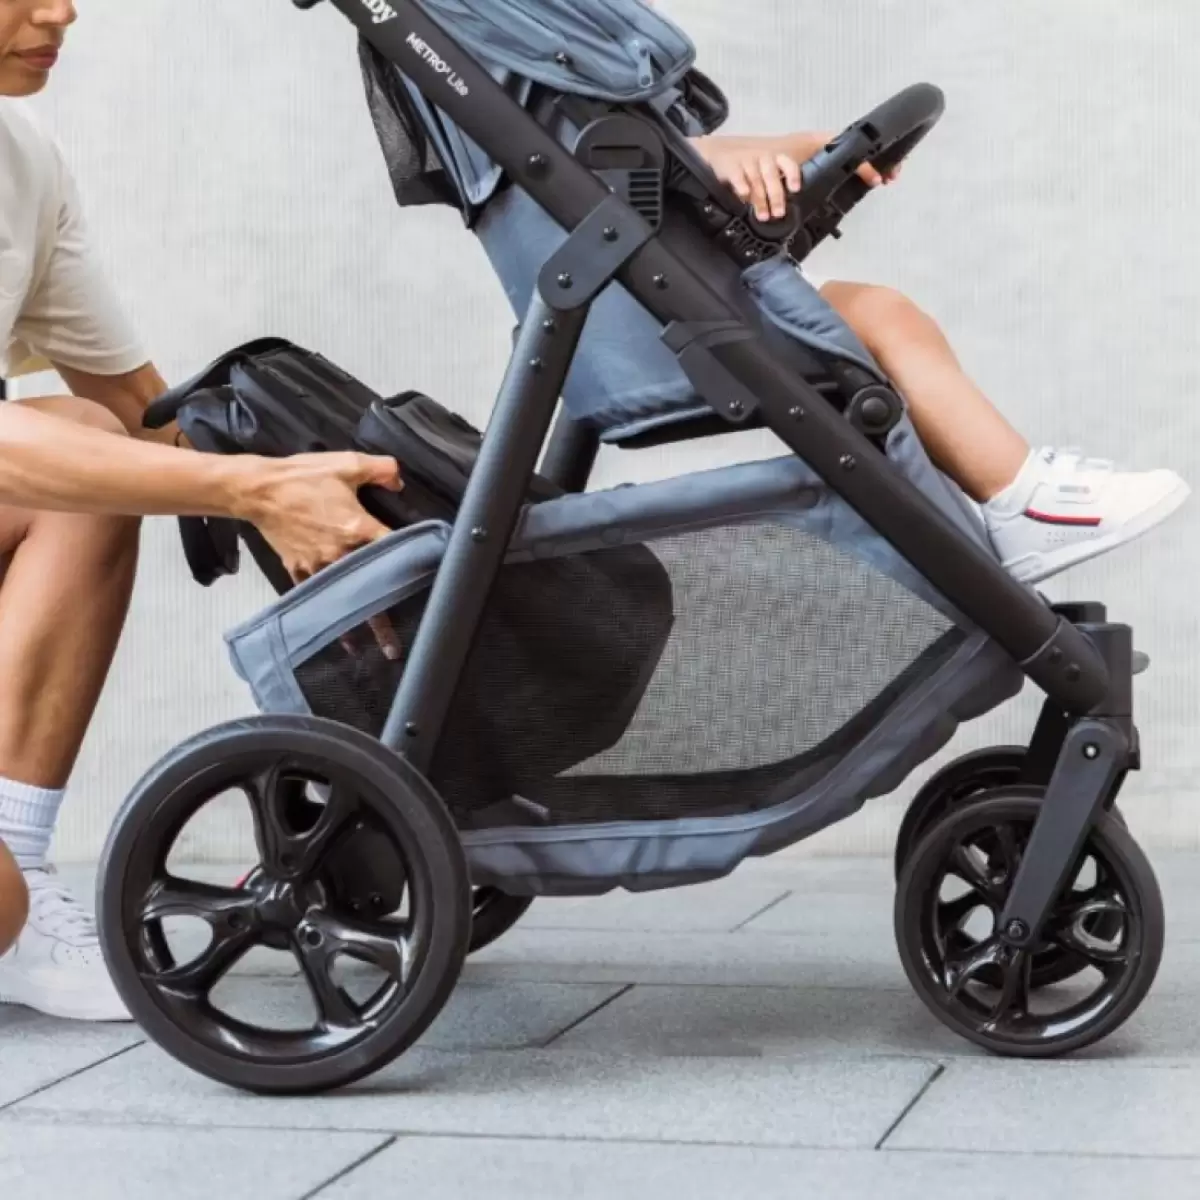 7 Reasons The Brand New Redsbaby Metro Lite Stroller Is The Pram For You 5